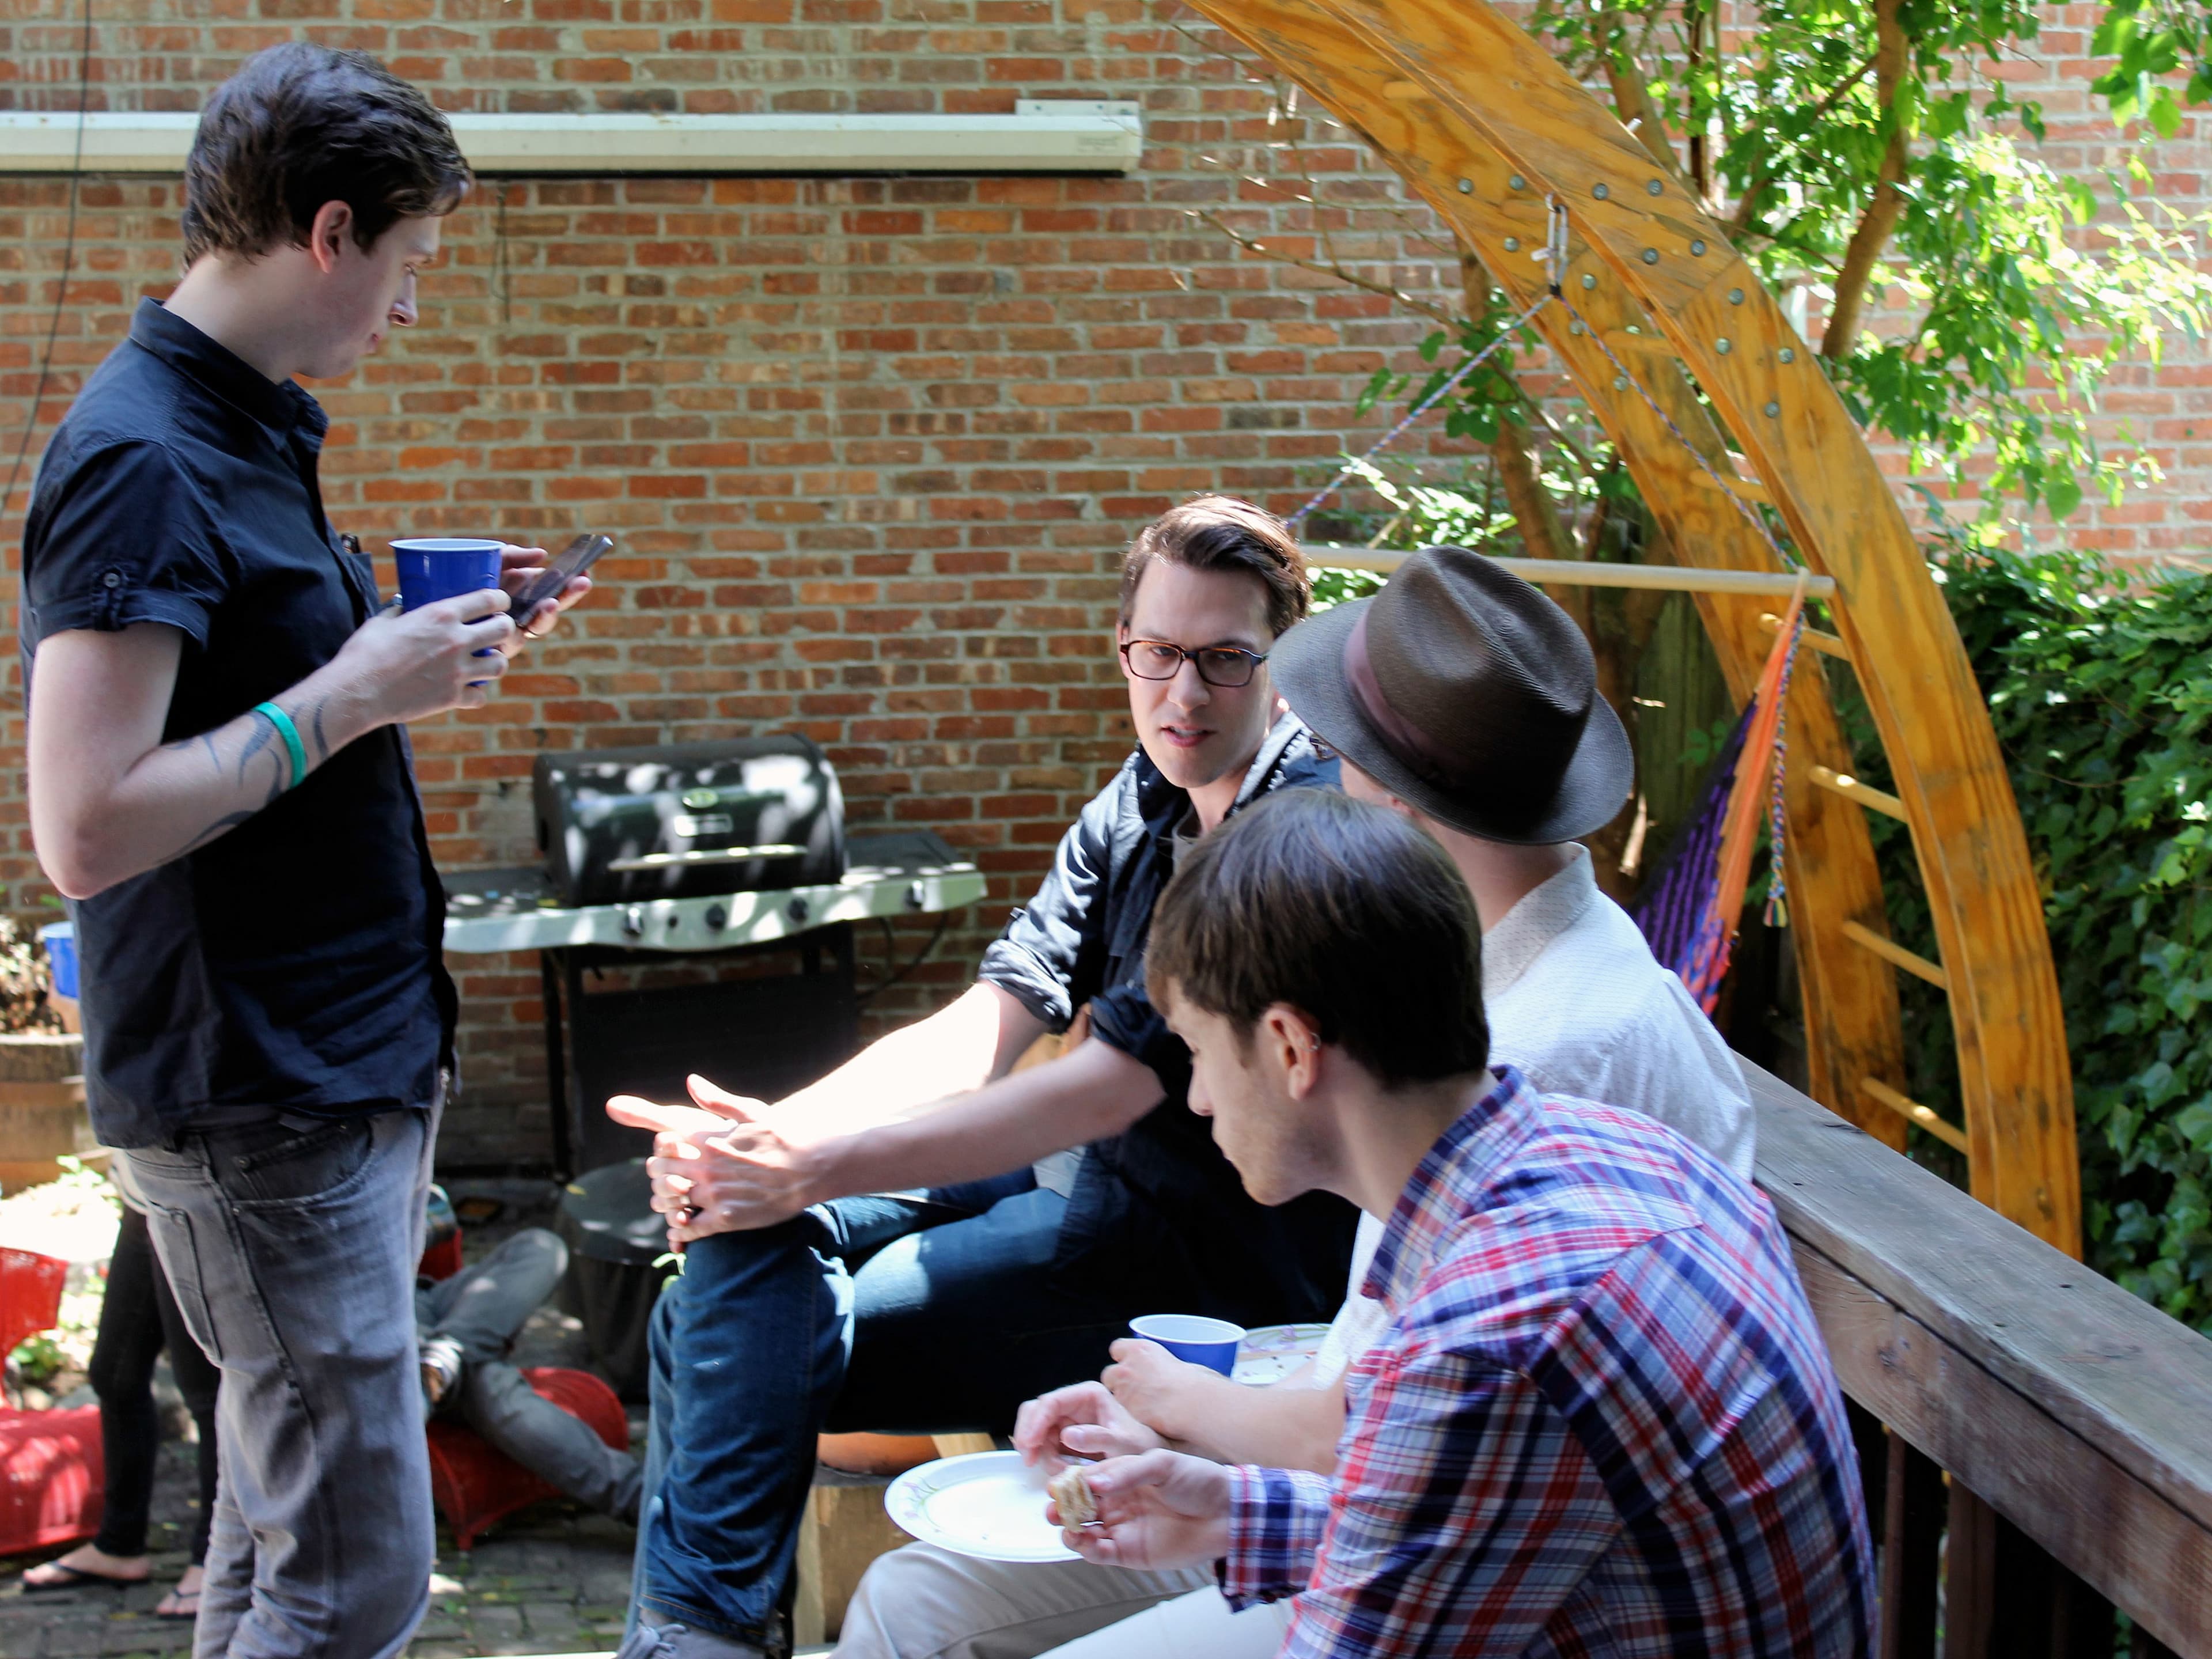 A group of four young adults socializing outdoors. One person is standing and looking at their phone while holding a cup. Three others are seated on a wooden bench, involved in conversation. There's a wooden trellis and green foliage in the background.